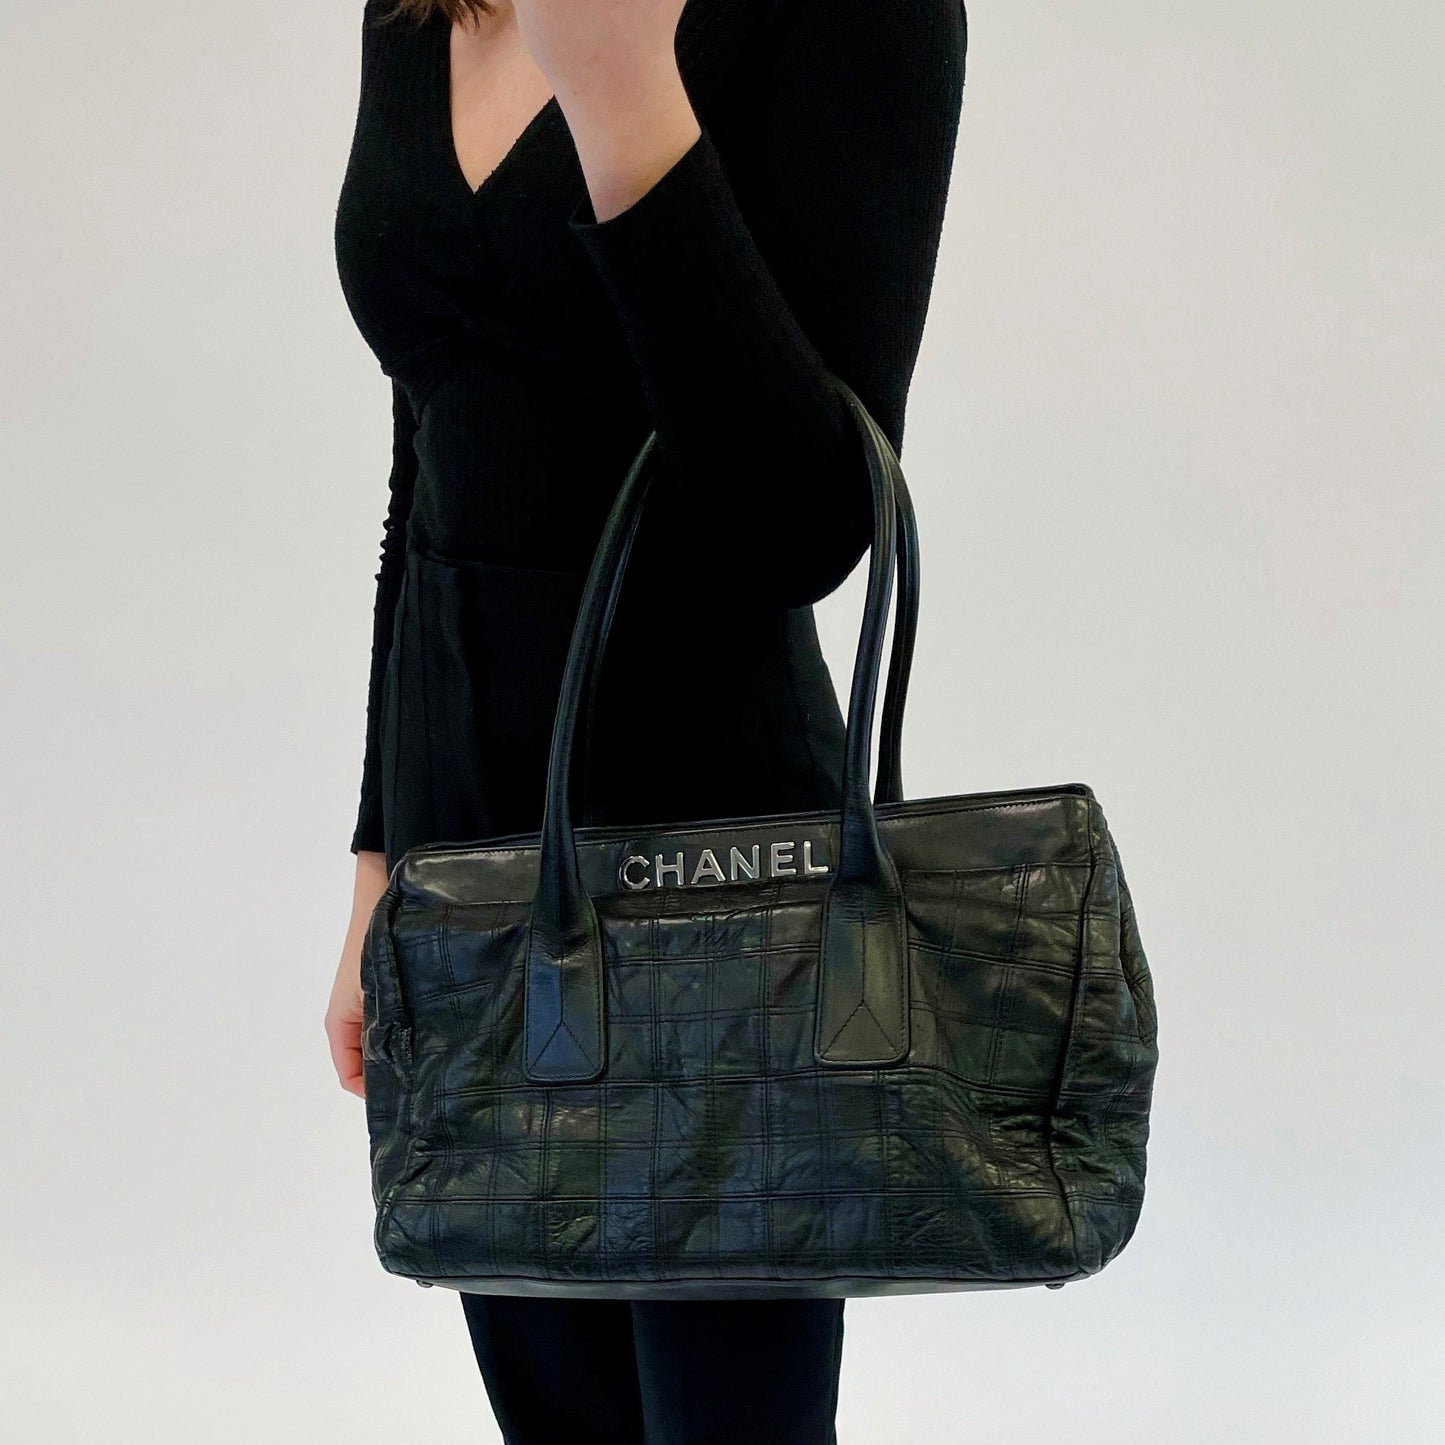 Chanel LAX Tote Square Quilt 2006/08